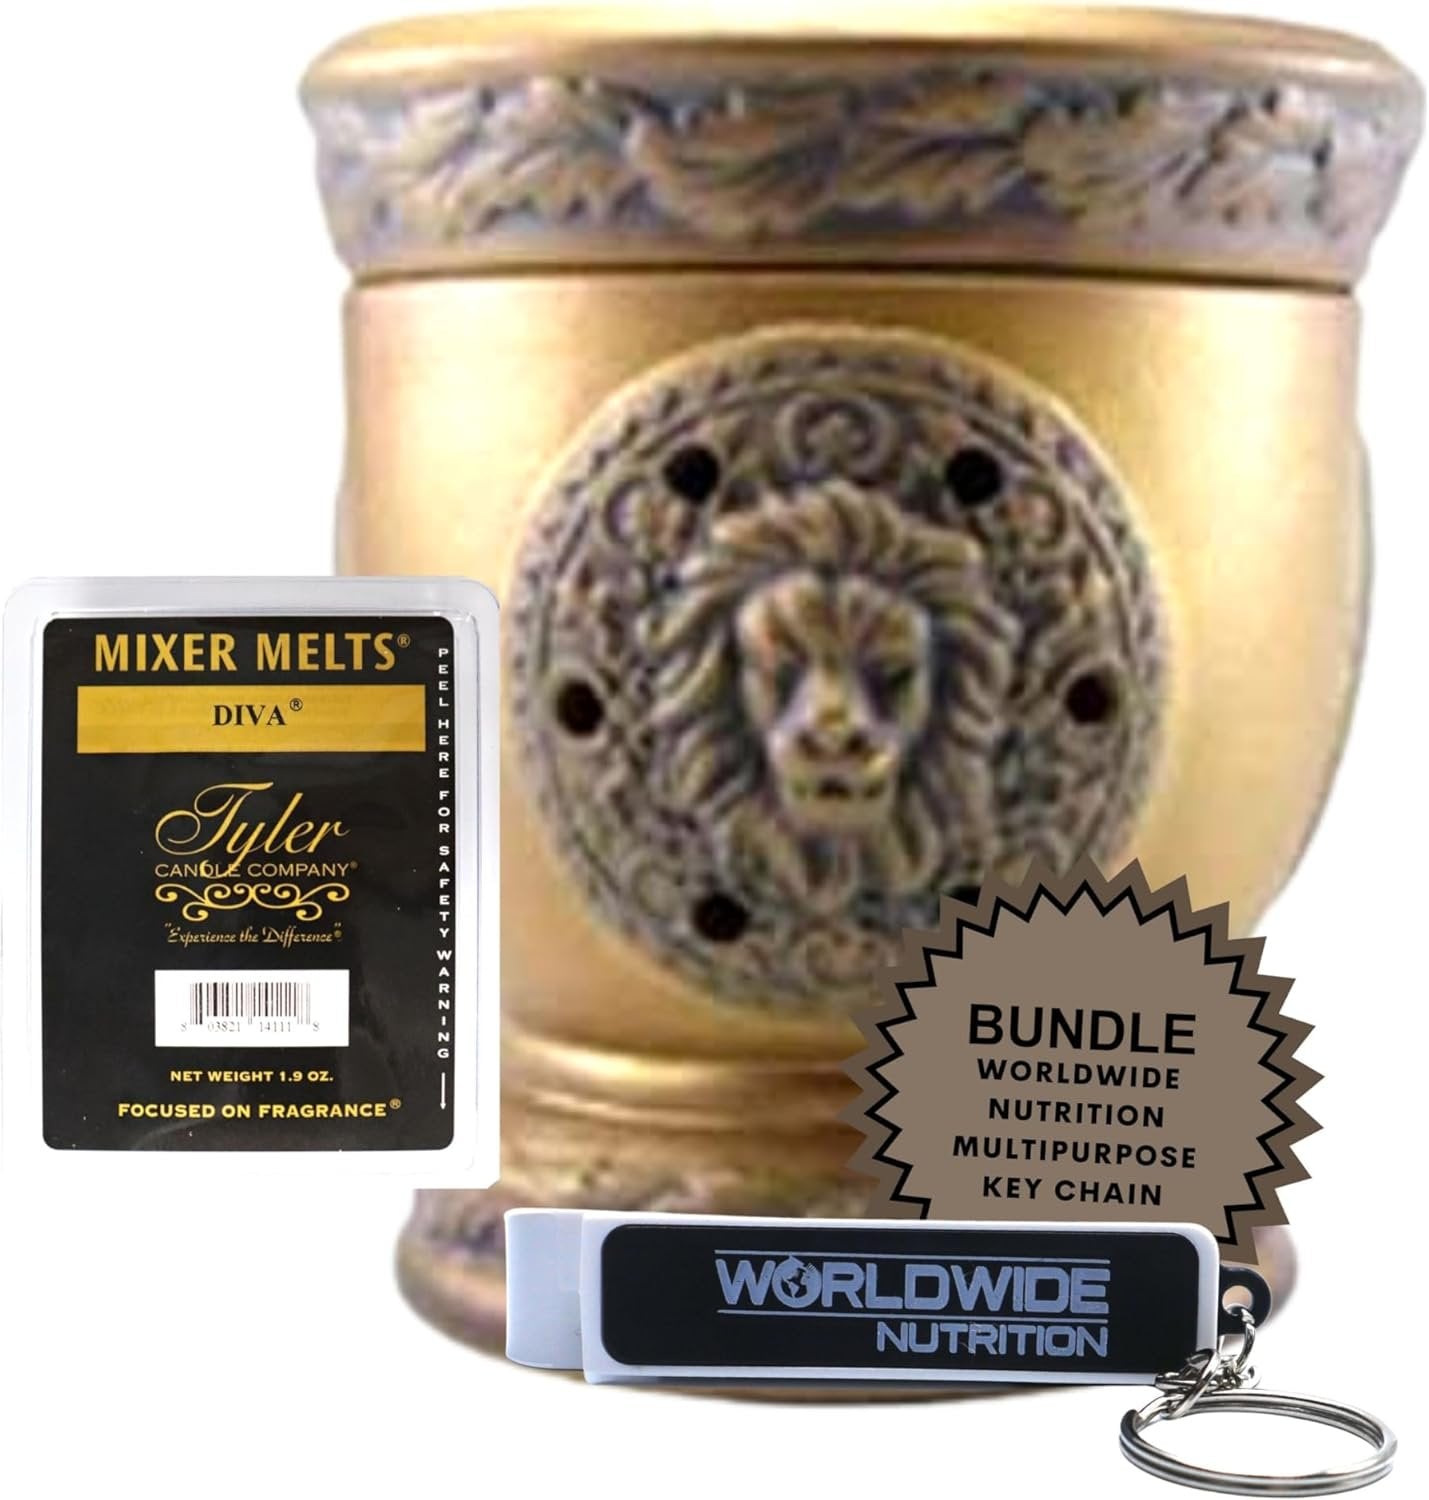 Worldwide Nutrition Bundle, 2 Items: Tyler Candle Company Lionesque Matte Bronze Fragrance Wax Warmer - Candle Wax Melt Warmer Home Decor with 6 Diva Scent Wax Melts and Multi-Purpose Key Chain